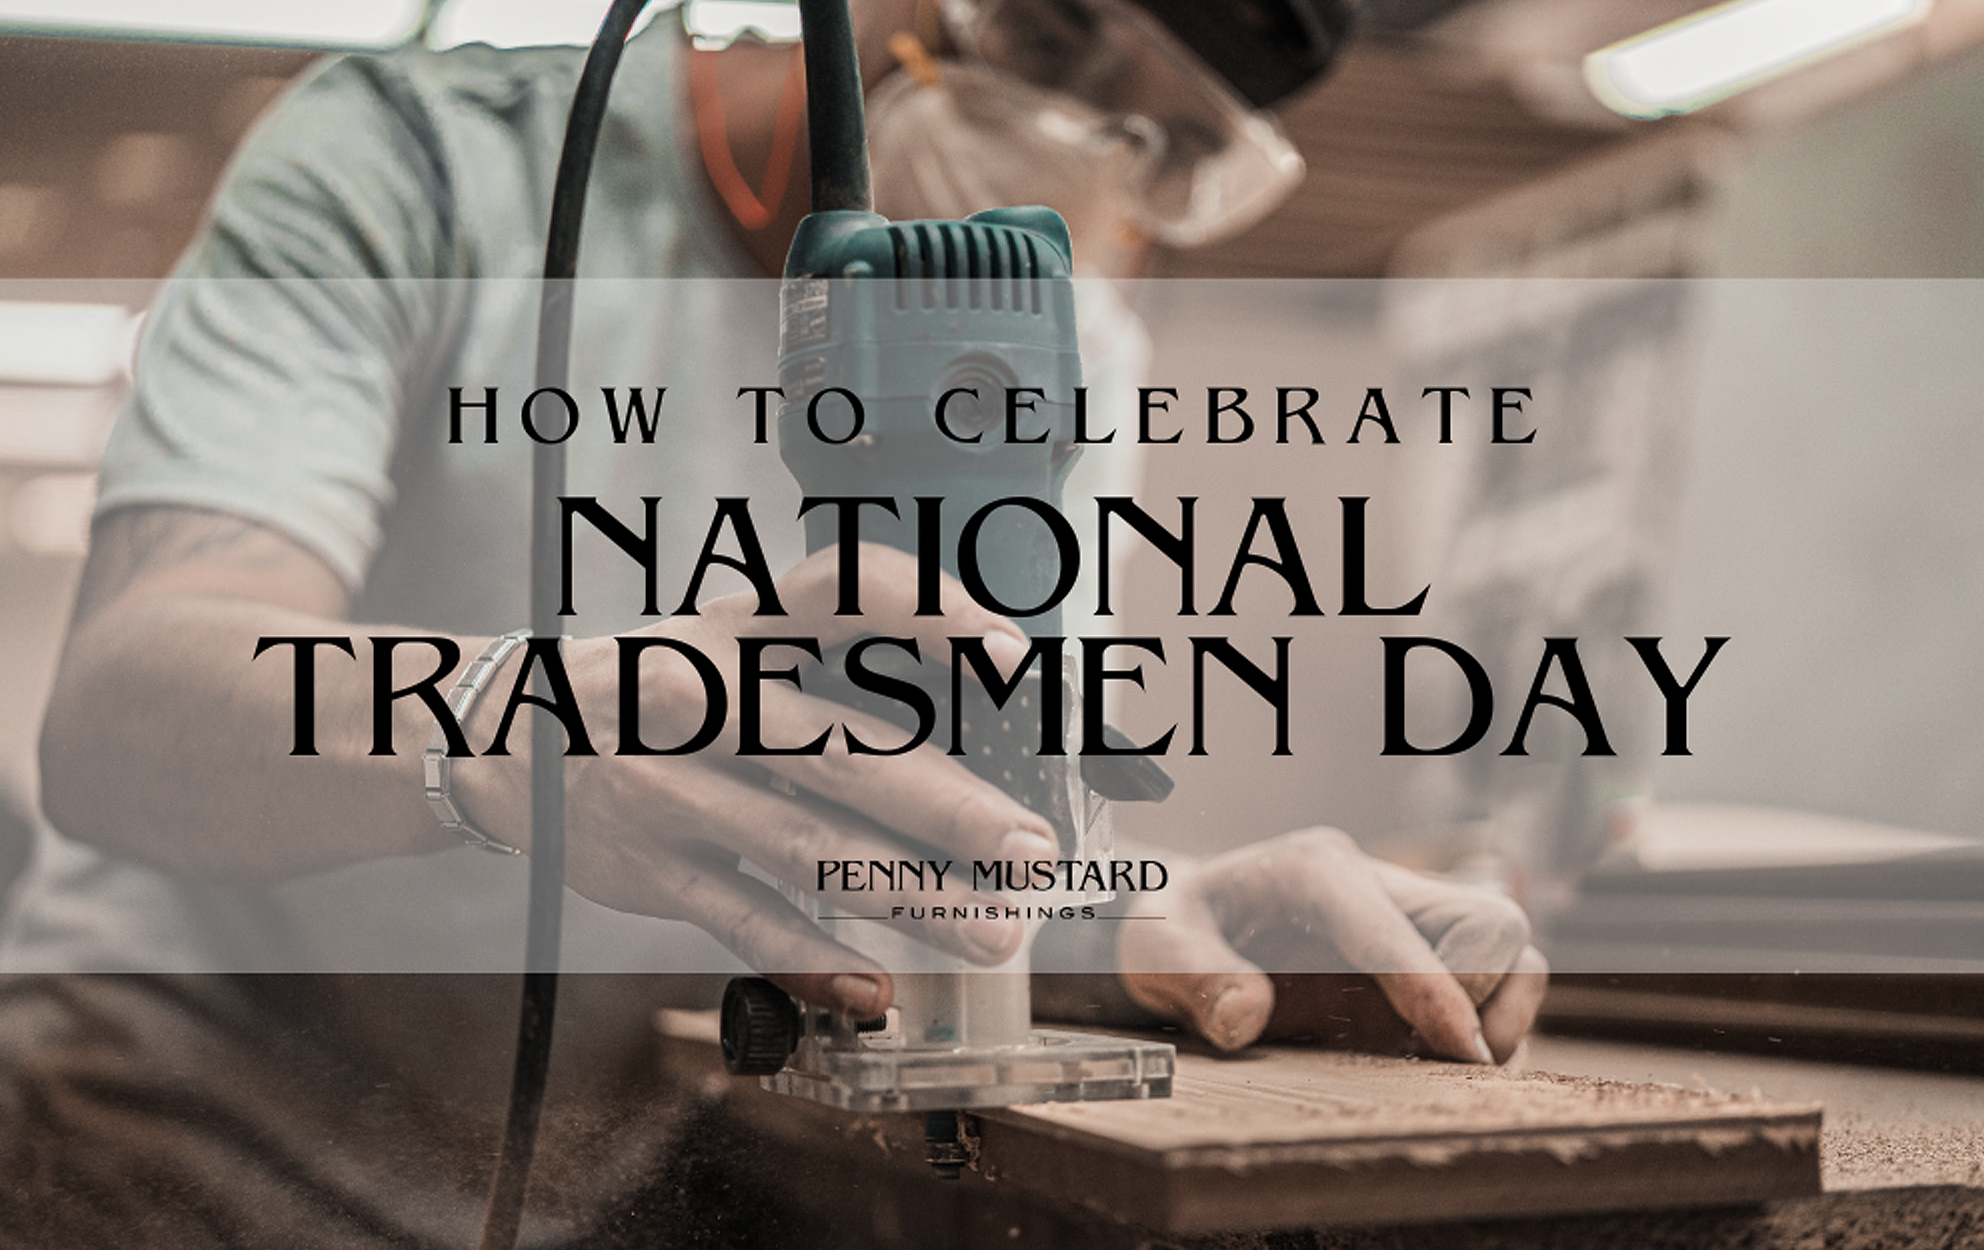 How to Celebrate National Tradesmen Day Penny Mustard Furnishings